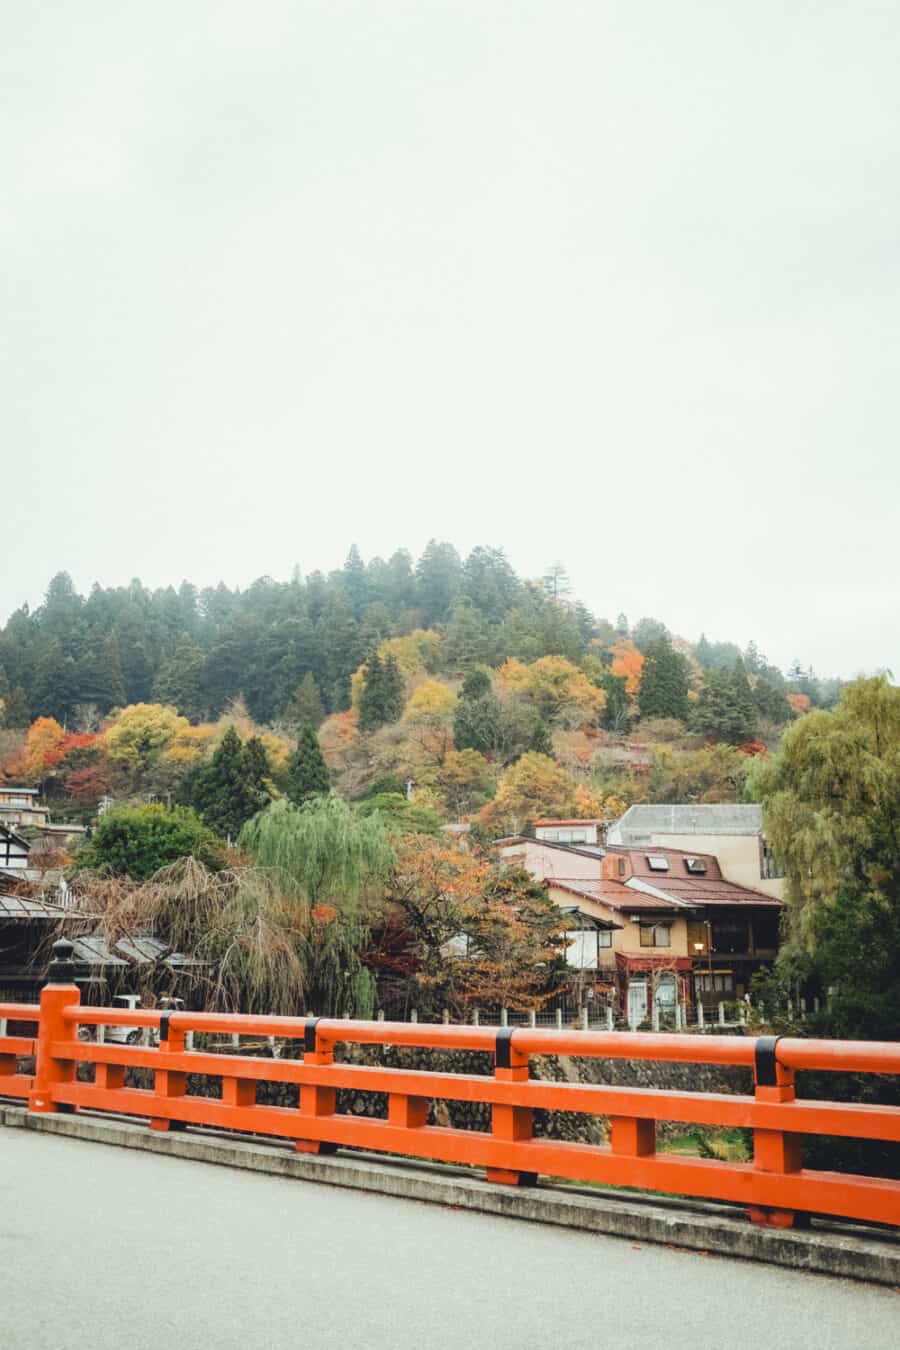 Coco Tran — Aesthetic Travel Blog By Film Photographer Coco Tran https://cocotran.com/guide-to-visiting-old-town-takayama/